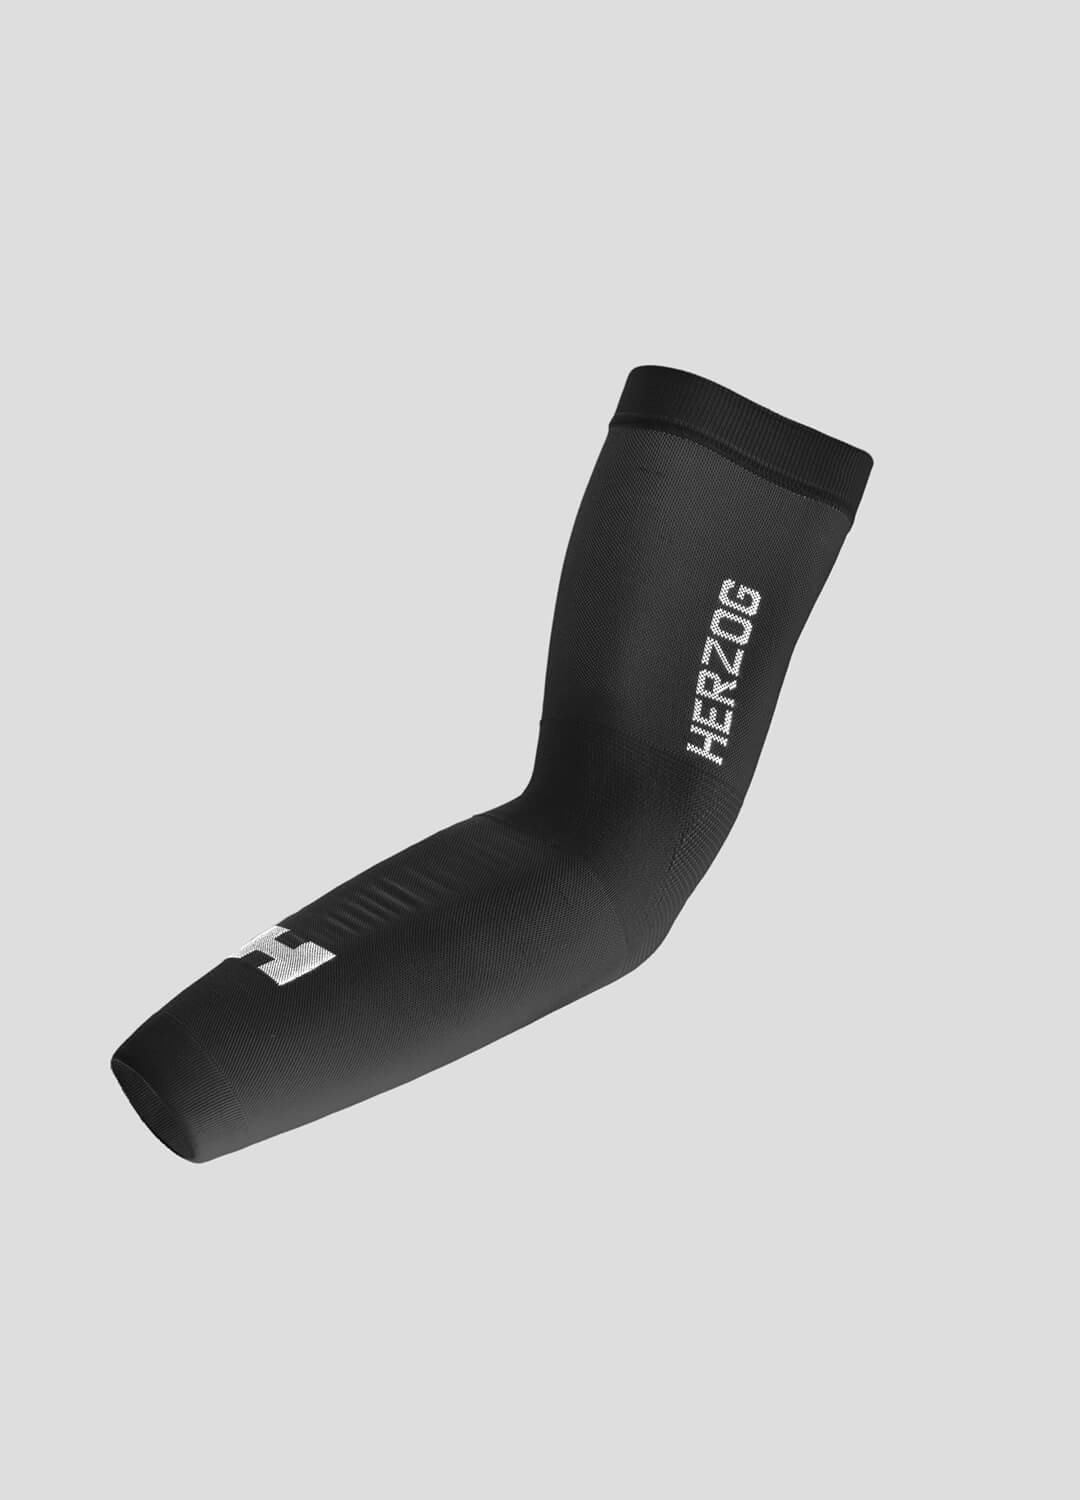 White PRO Compression Arm Sleeves - SALE –